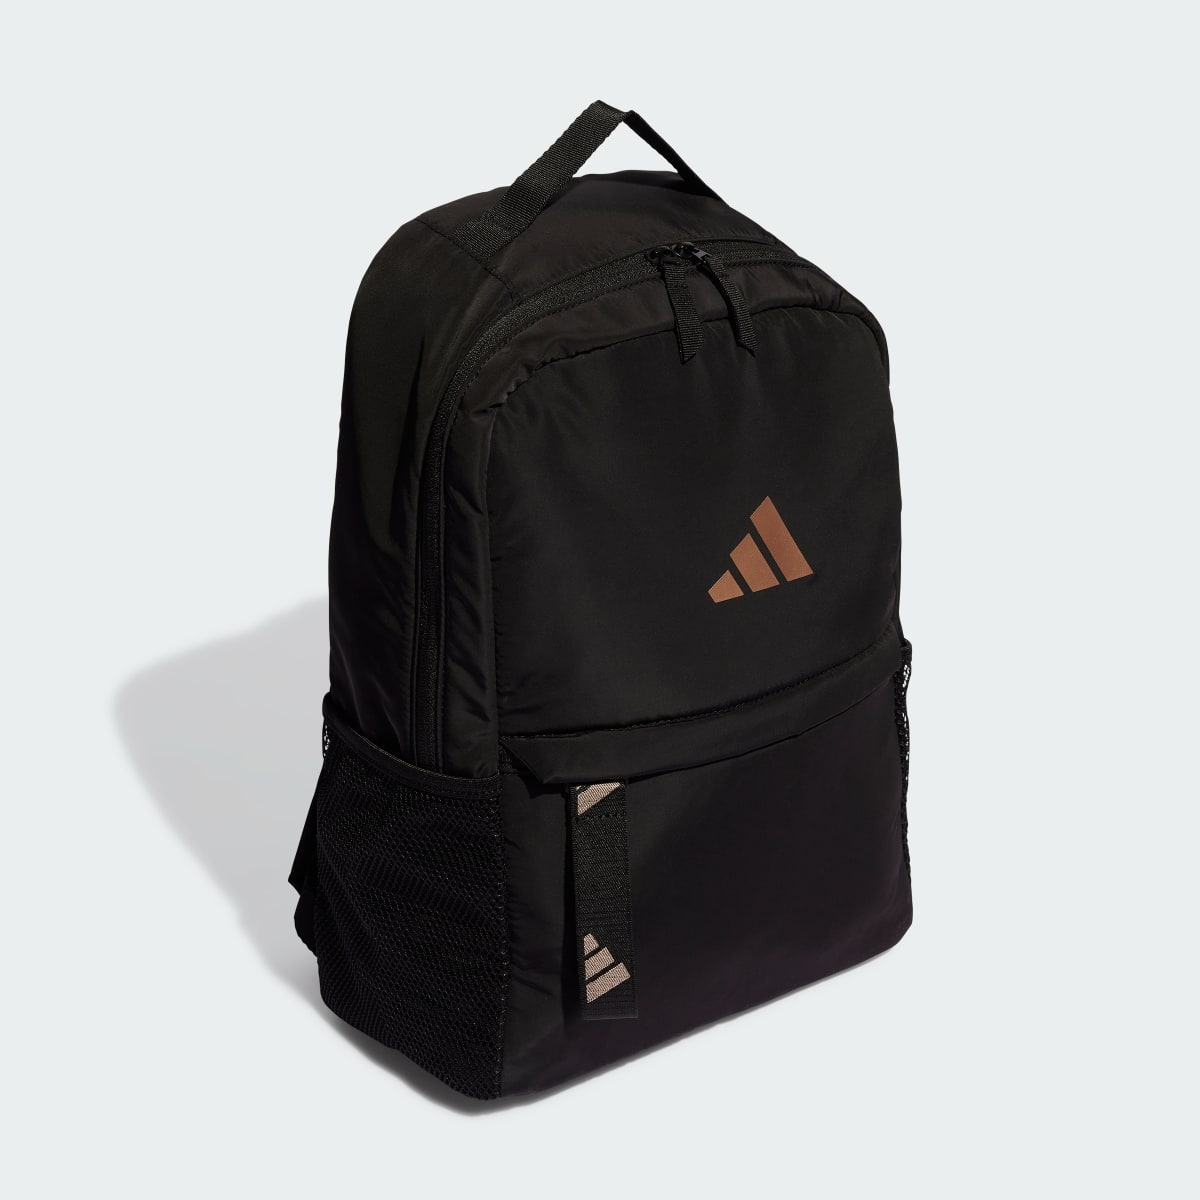 Adidas Sport Padded Backpack. 4